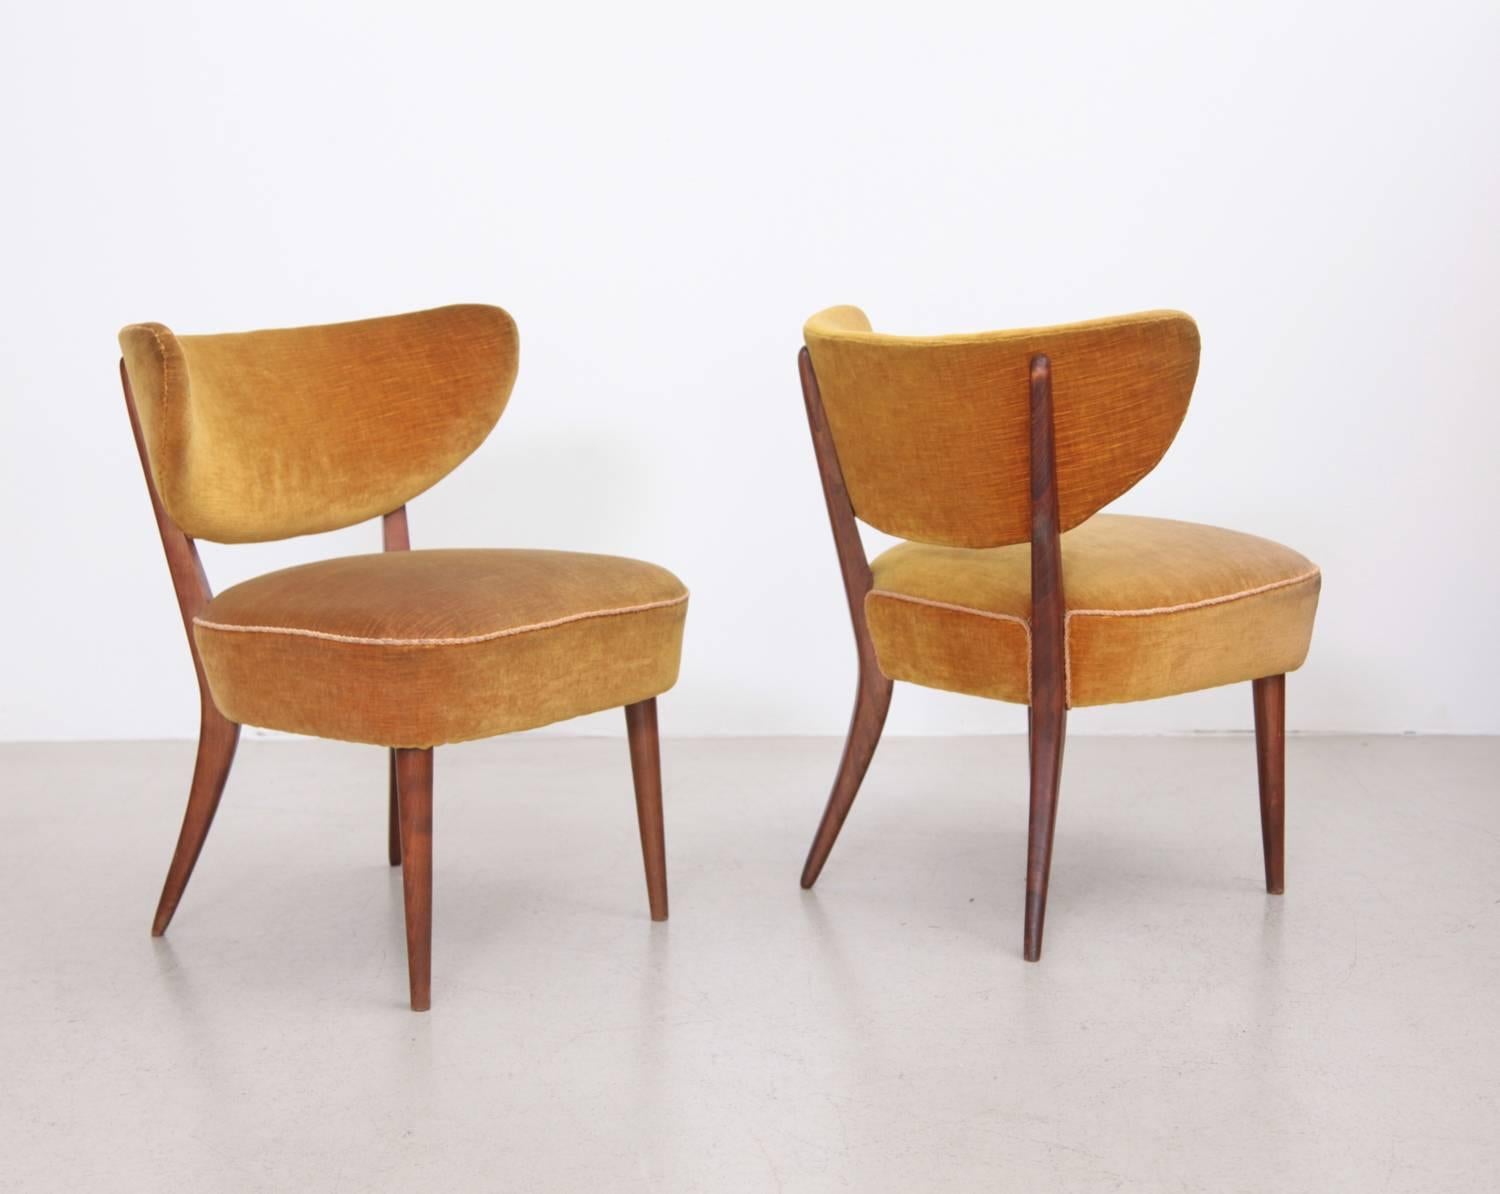 Mid-Century Modern Pair of 1950s German Curved Back Chairs by Arch, Traulsen in Mohair Fabric